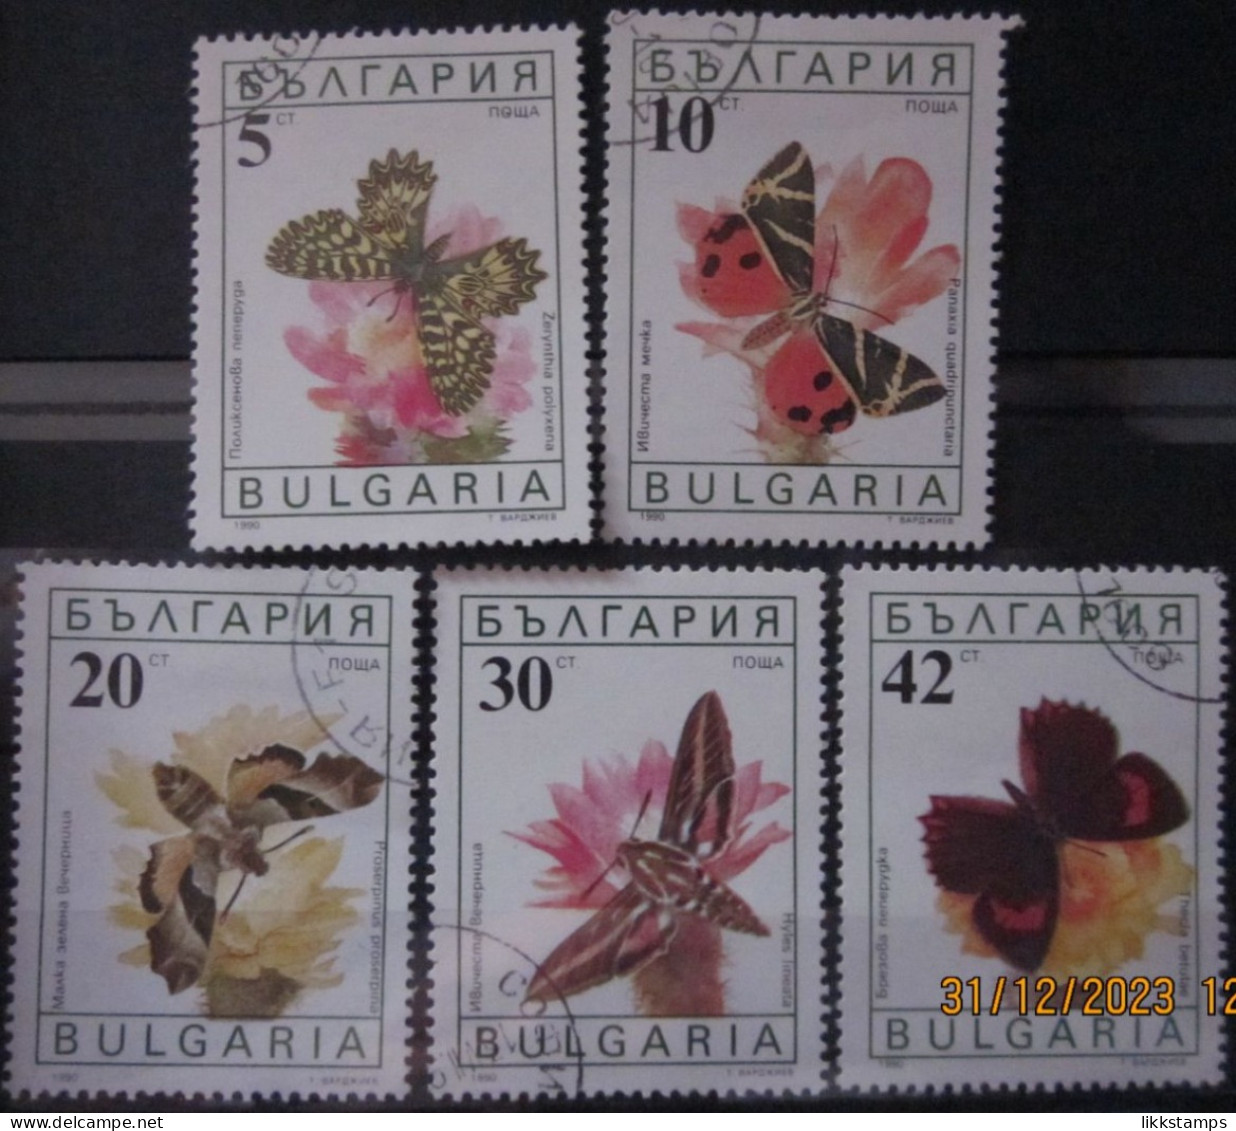 BULGARIA 1990 ~ S.G. 3699 - 3703, ~ BUTTERFLIES AND MOTHS. ~  VFU #02913 - Used Stamps